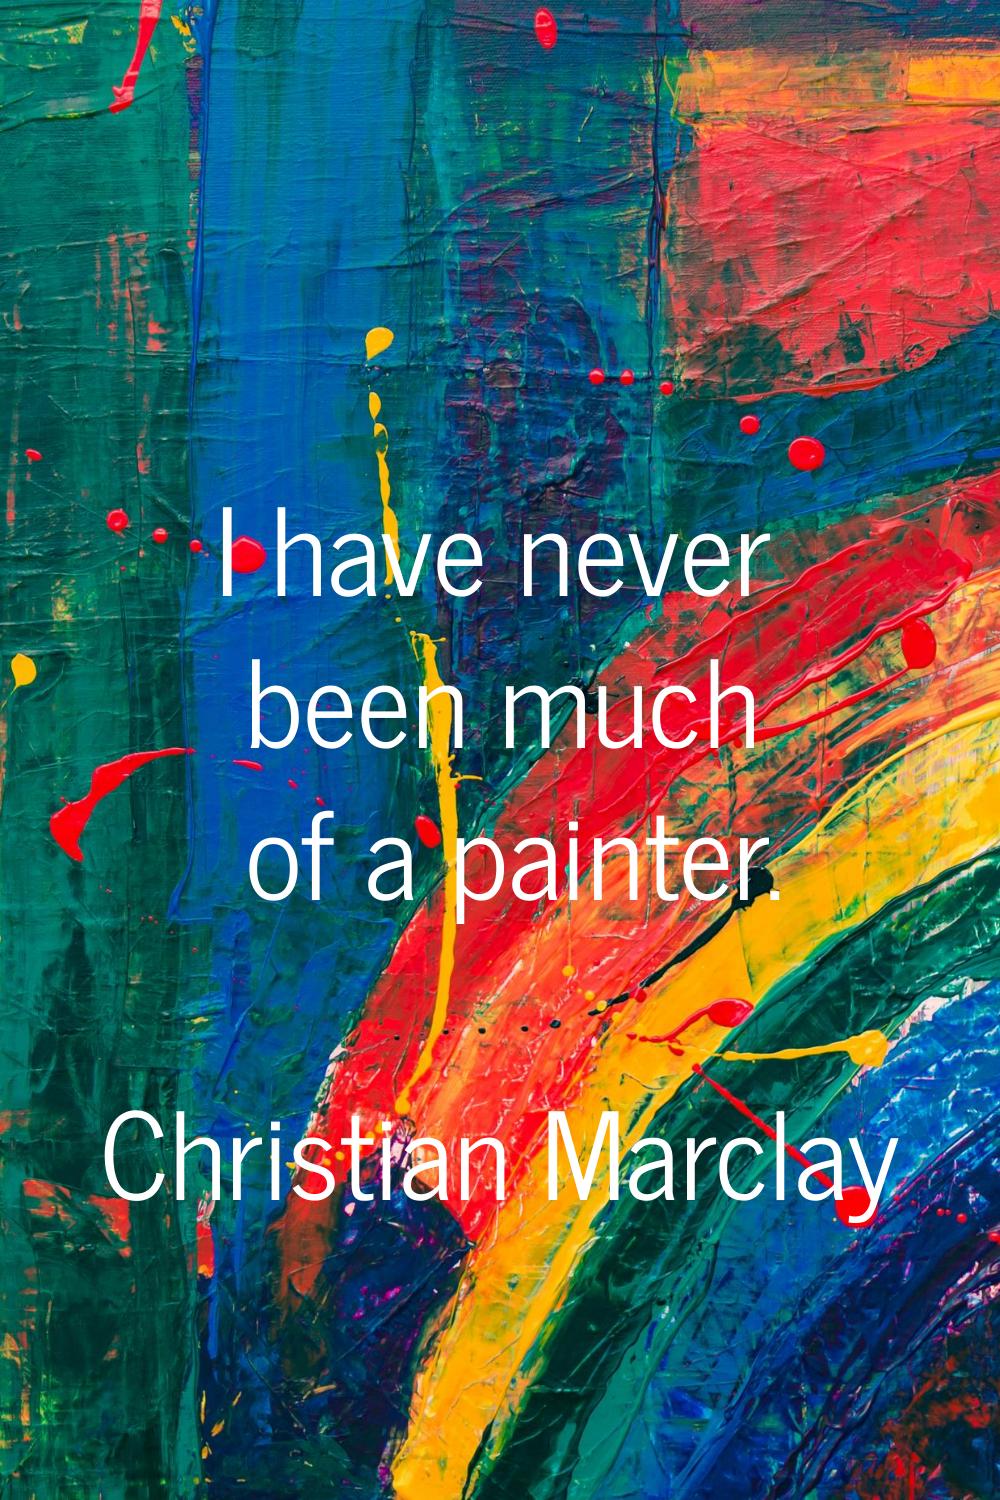 I have never been much of a painter.